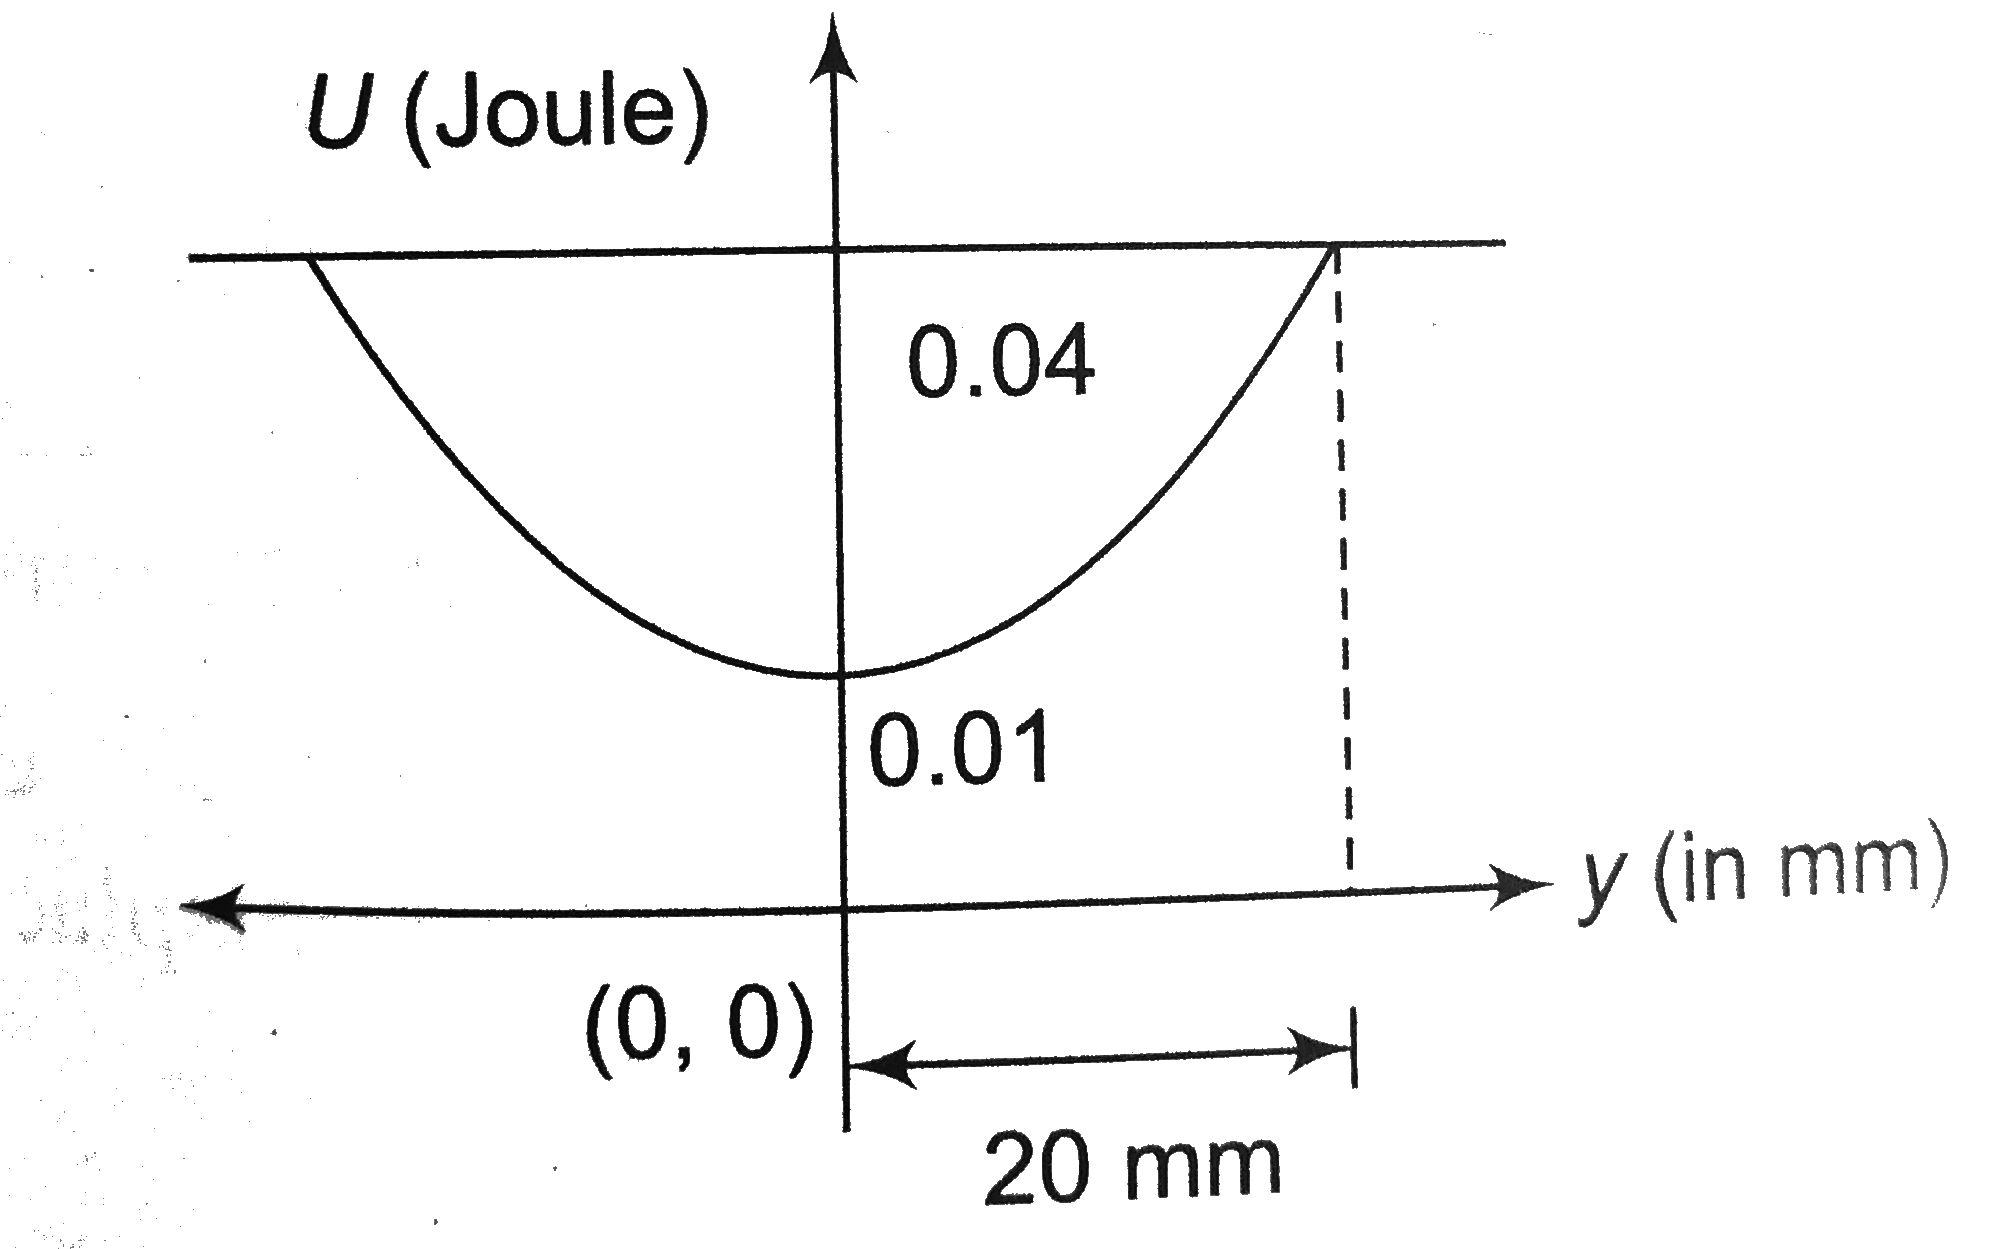 The variation of potential energy of harmonic oscillator is as shown in figure. The spring constant is